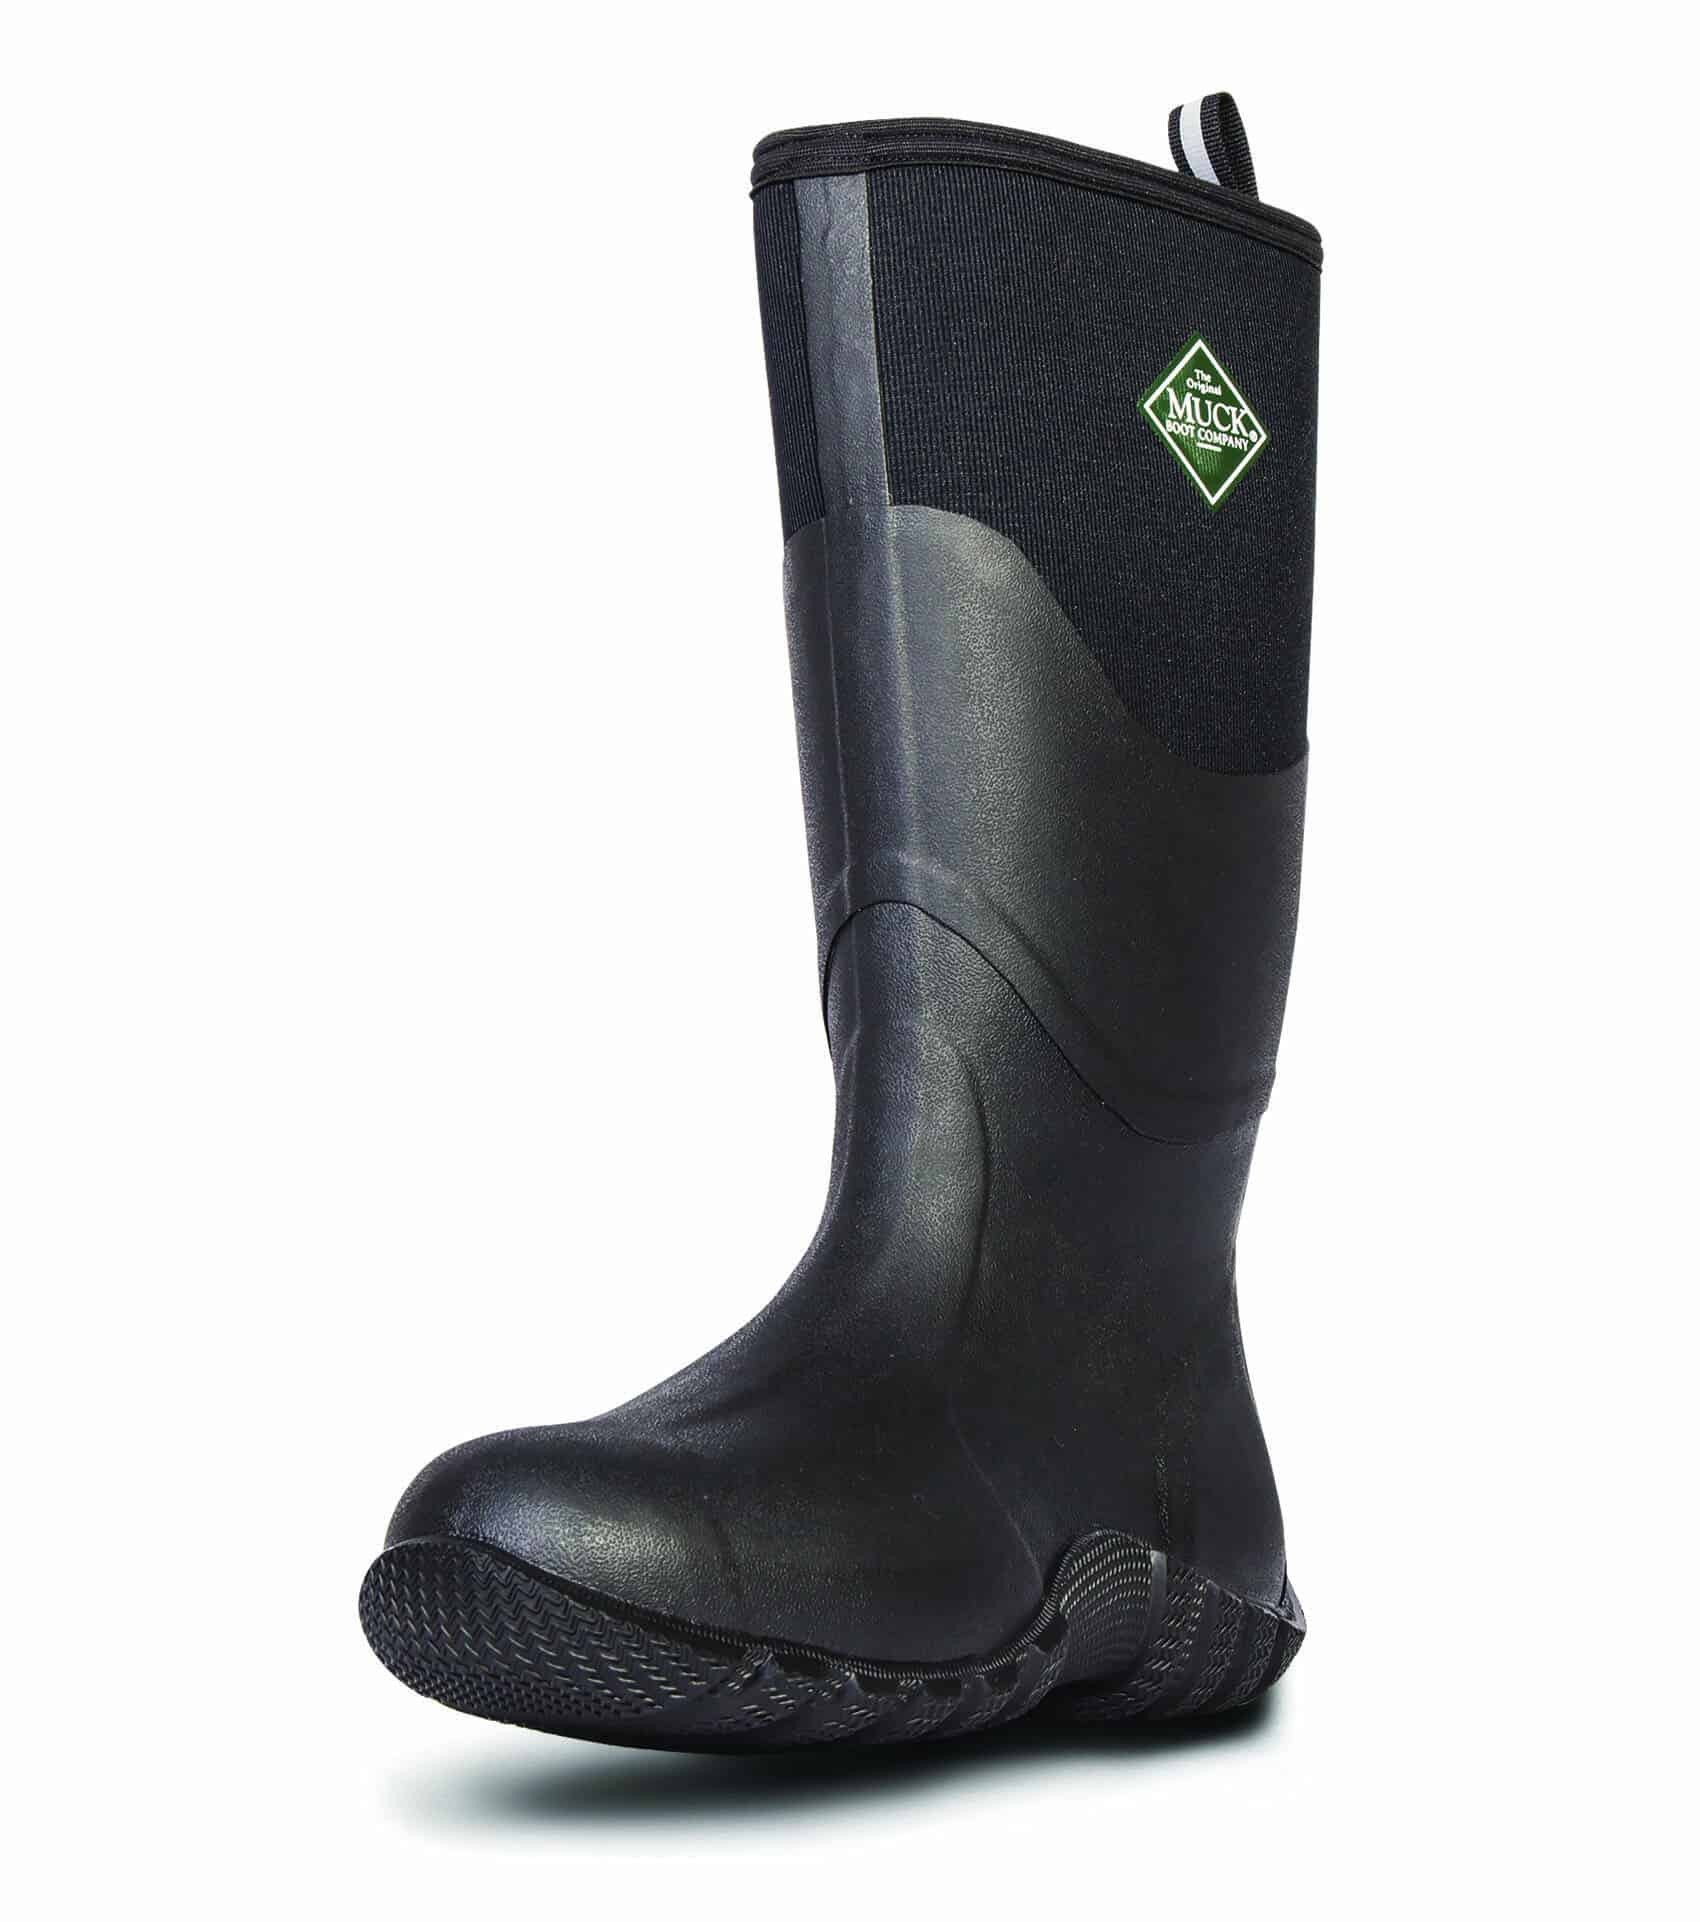 muck chore boots sale